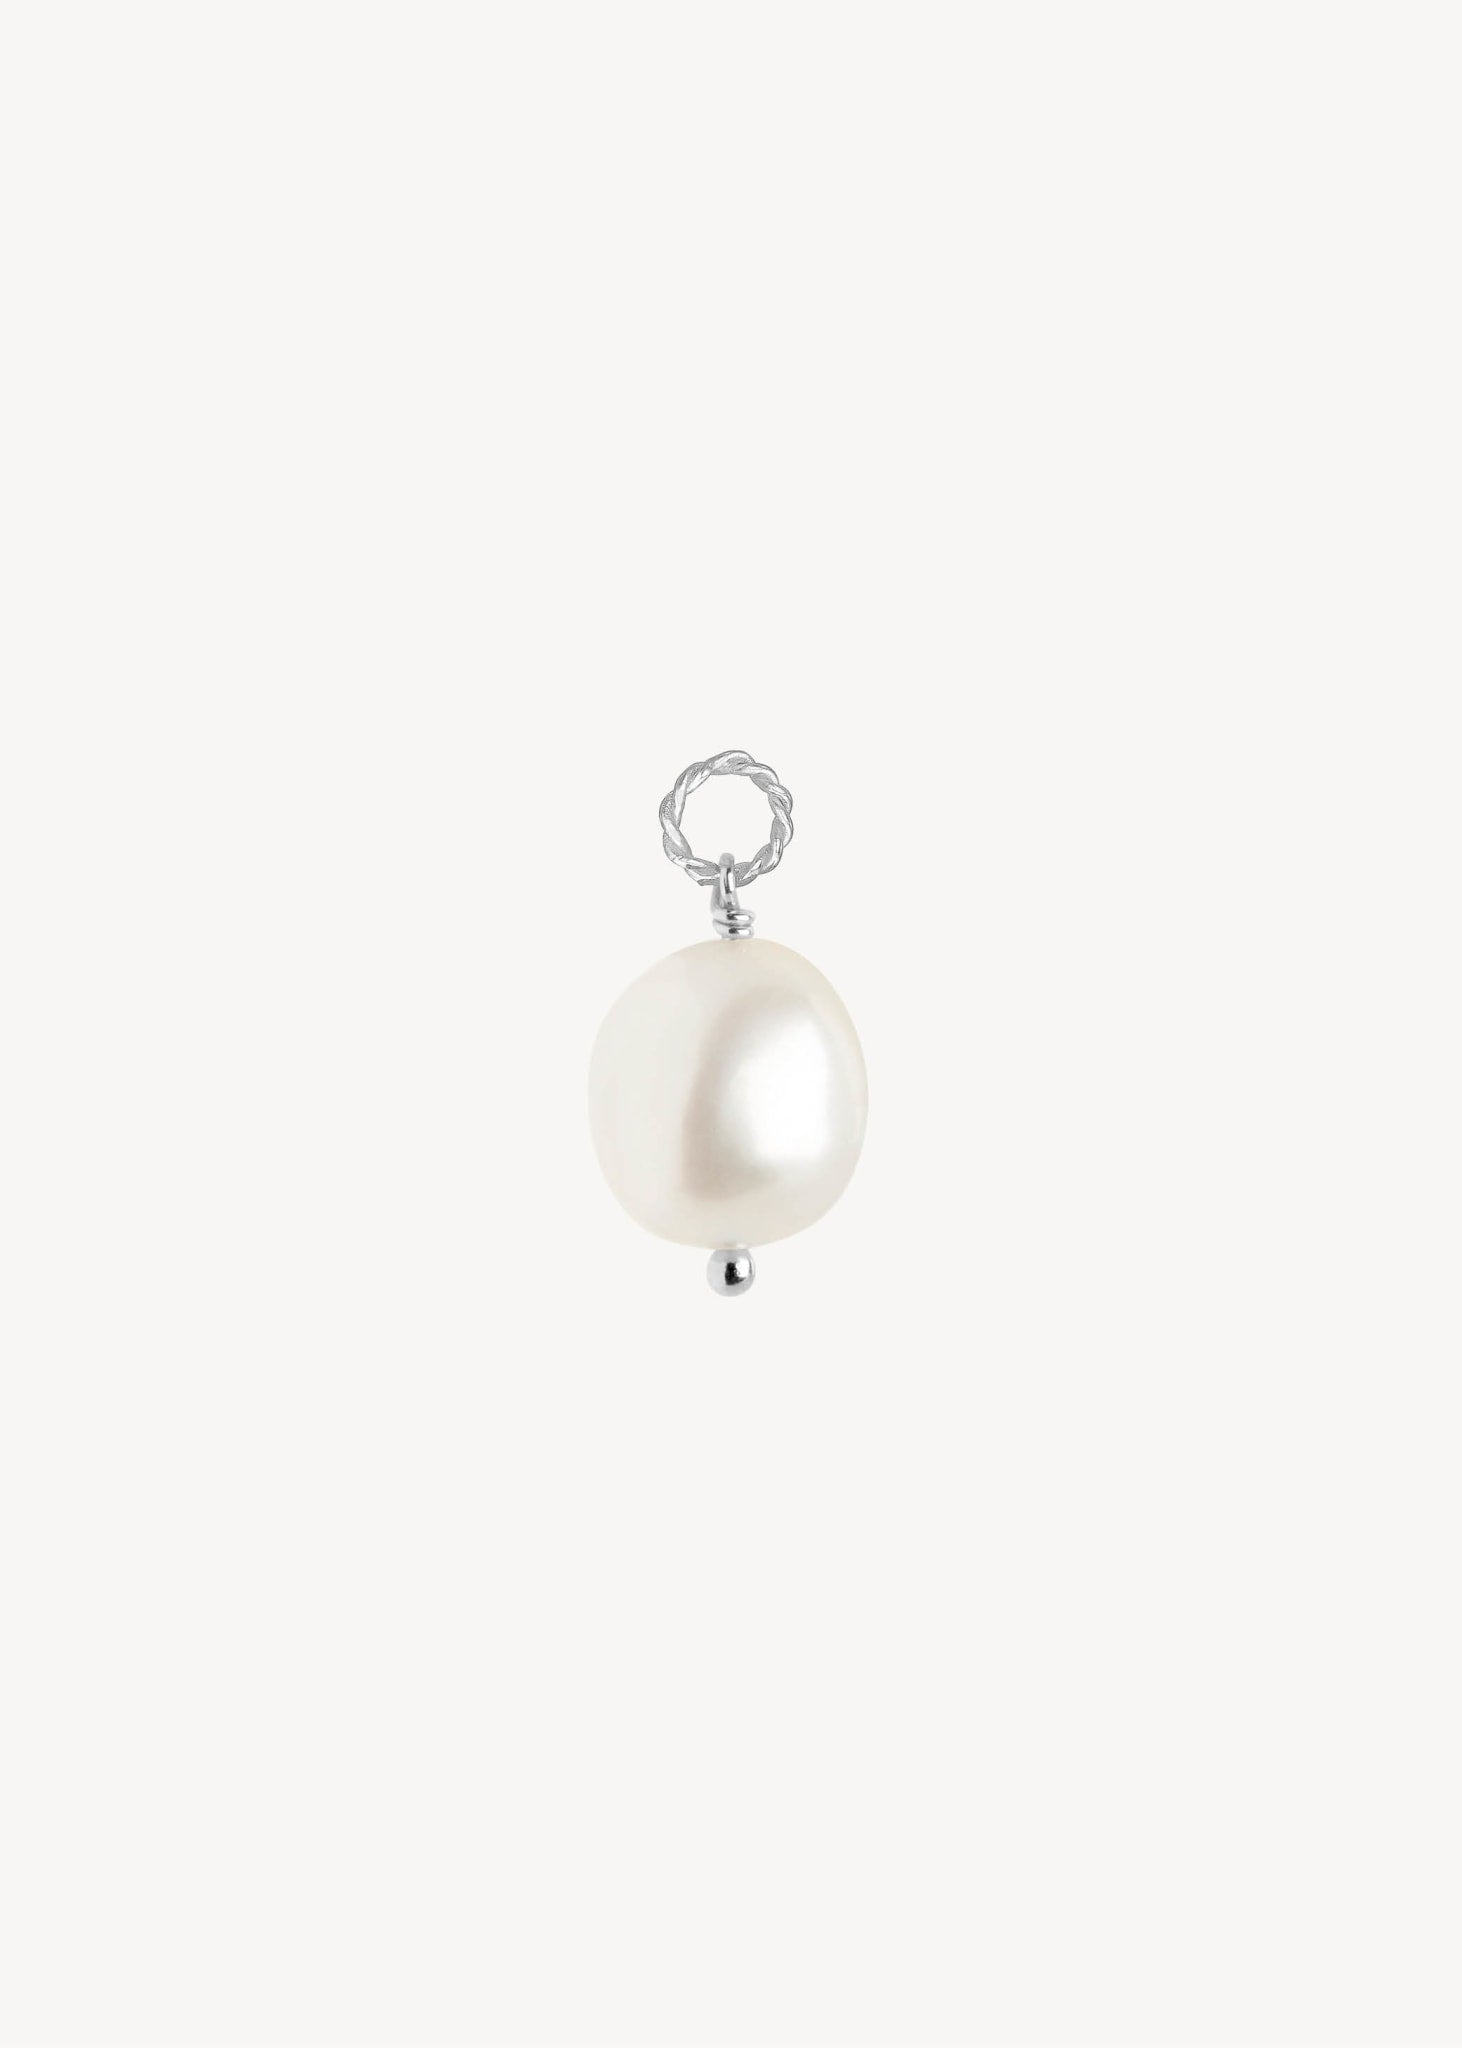 Balloon charm with Pearl - silver